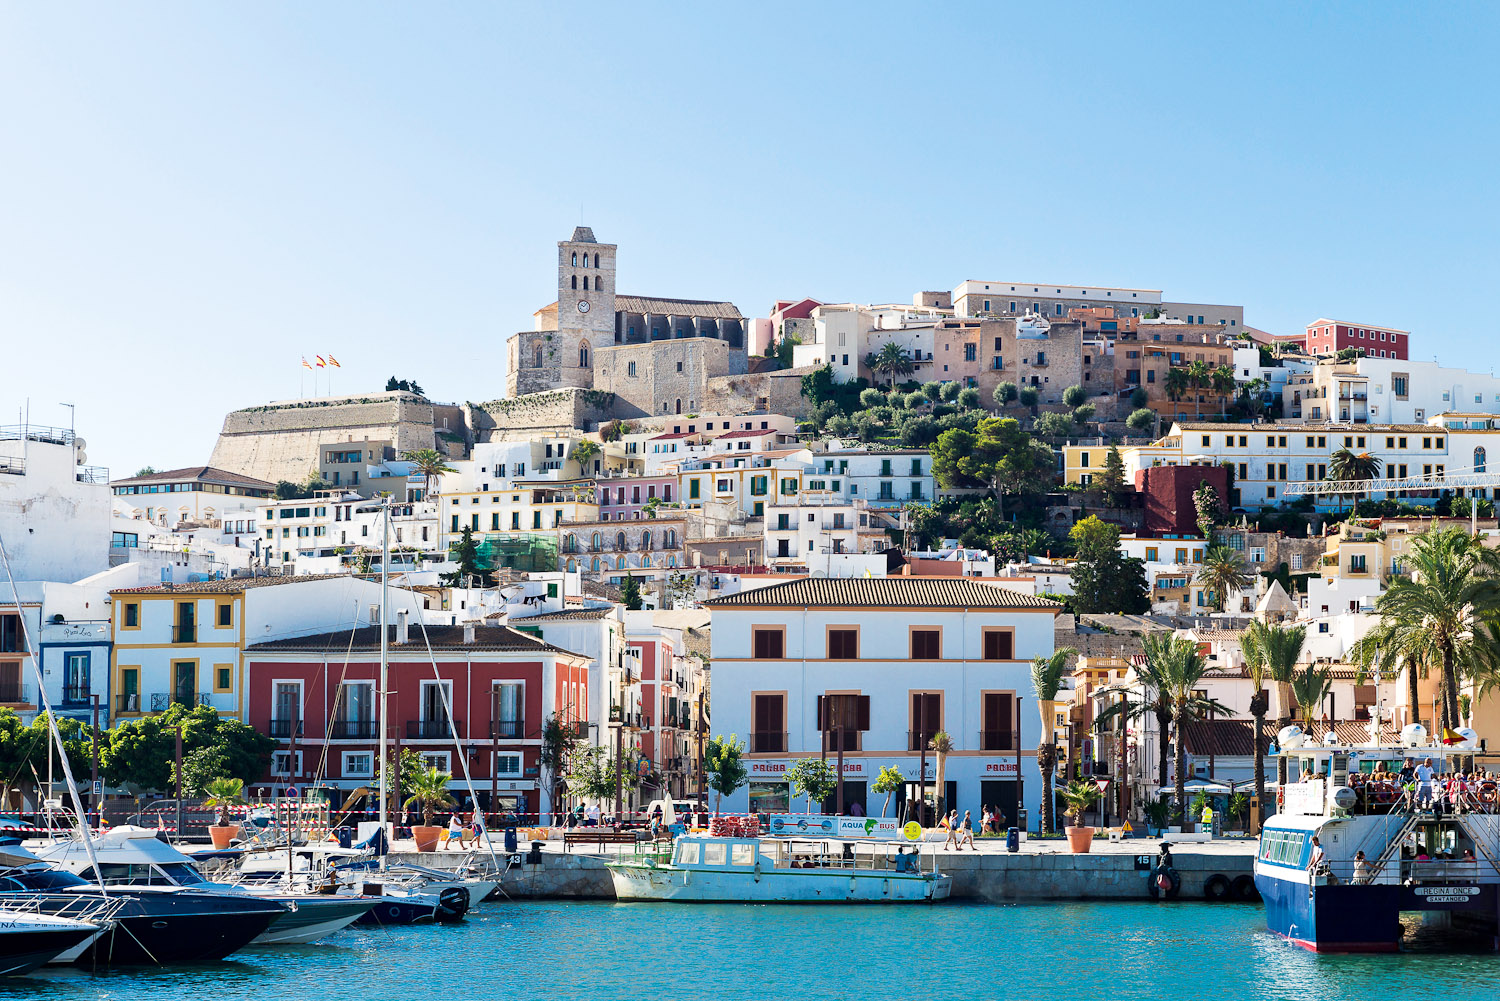 Ibiza Town as seen from the ferry to the island of Formentera.